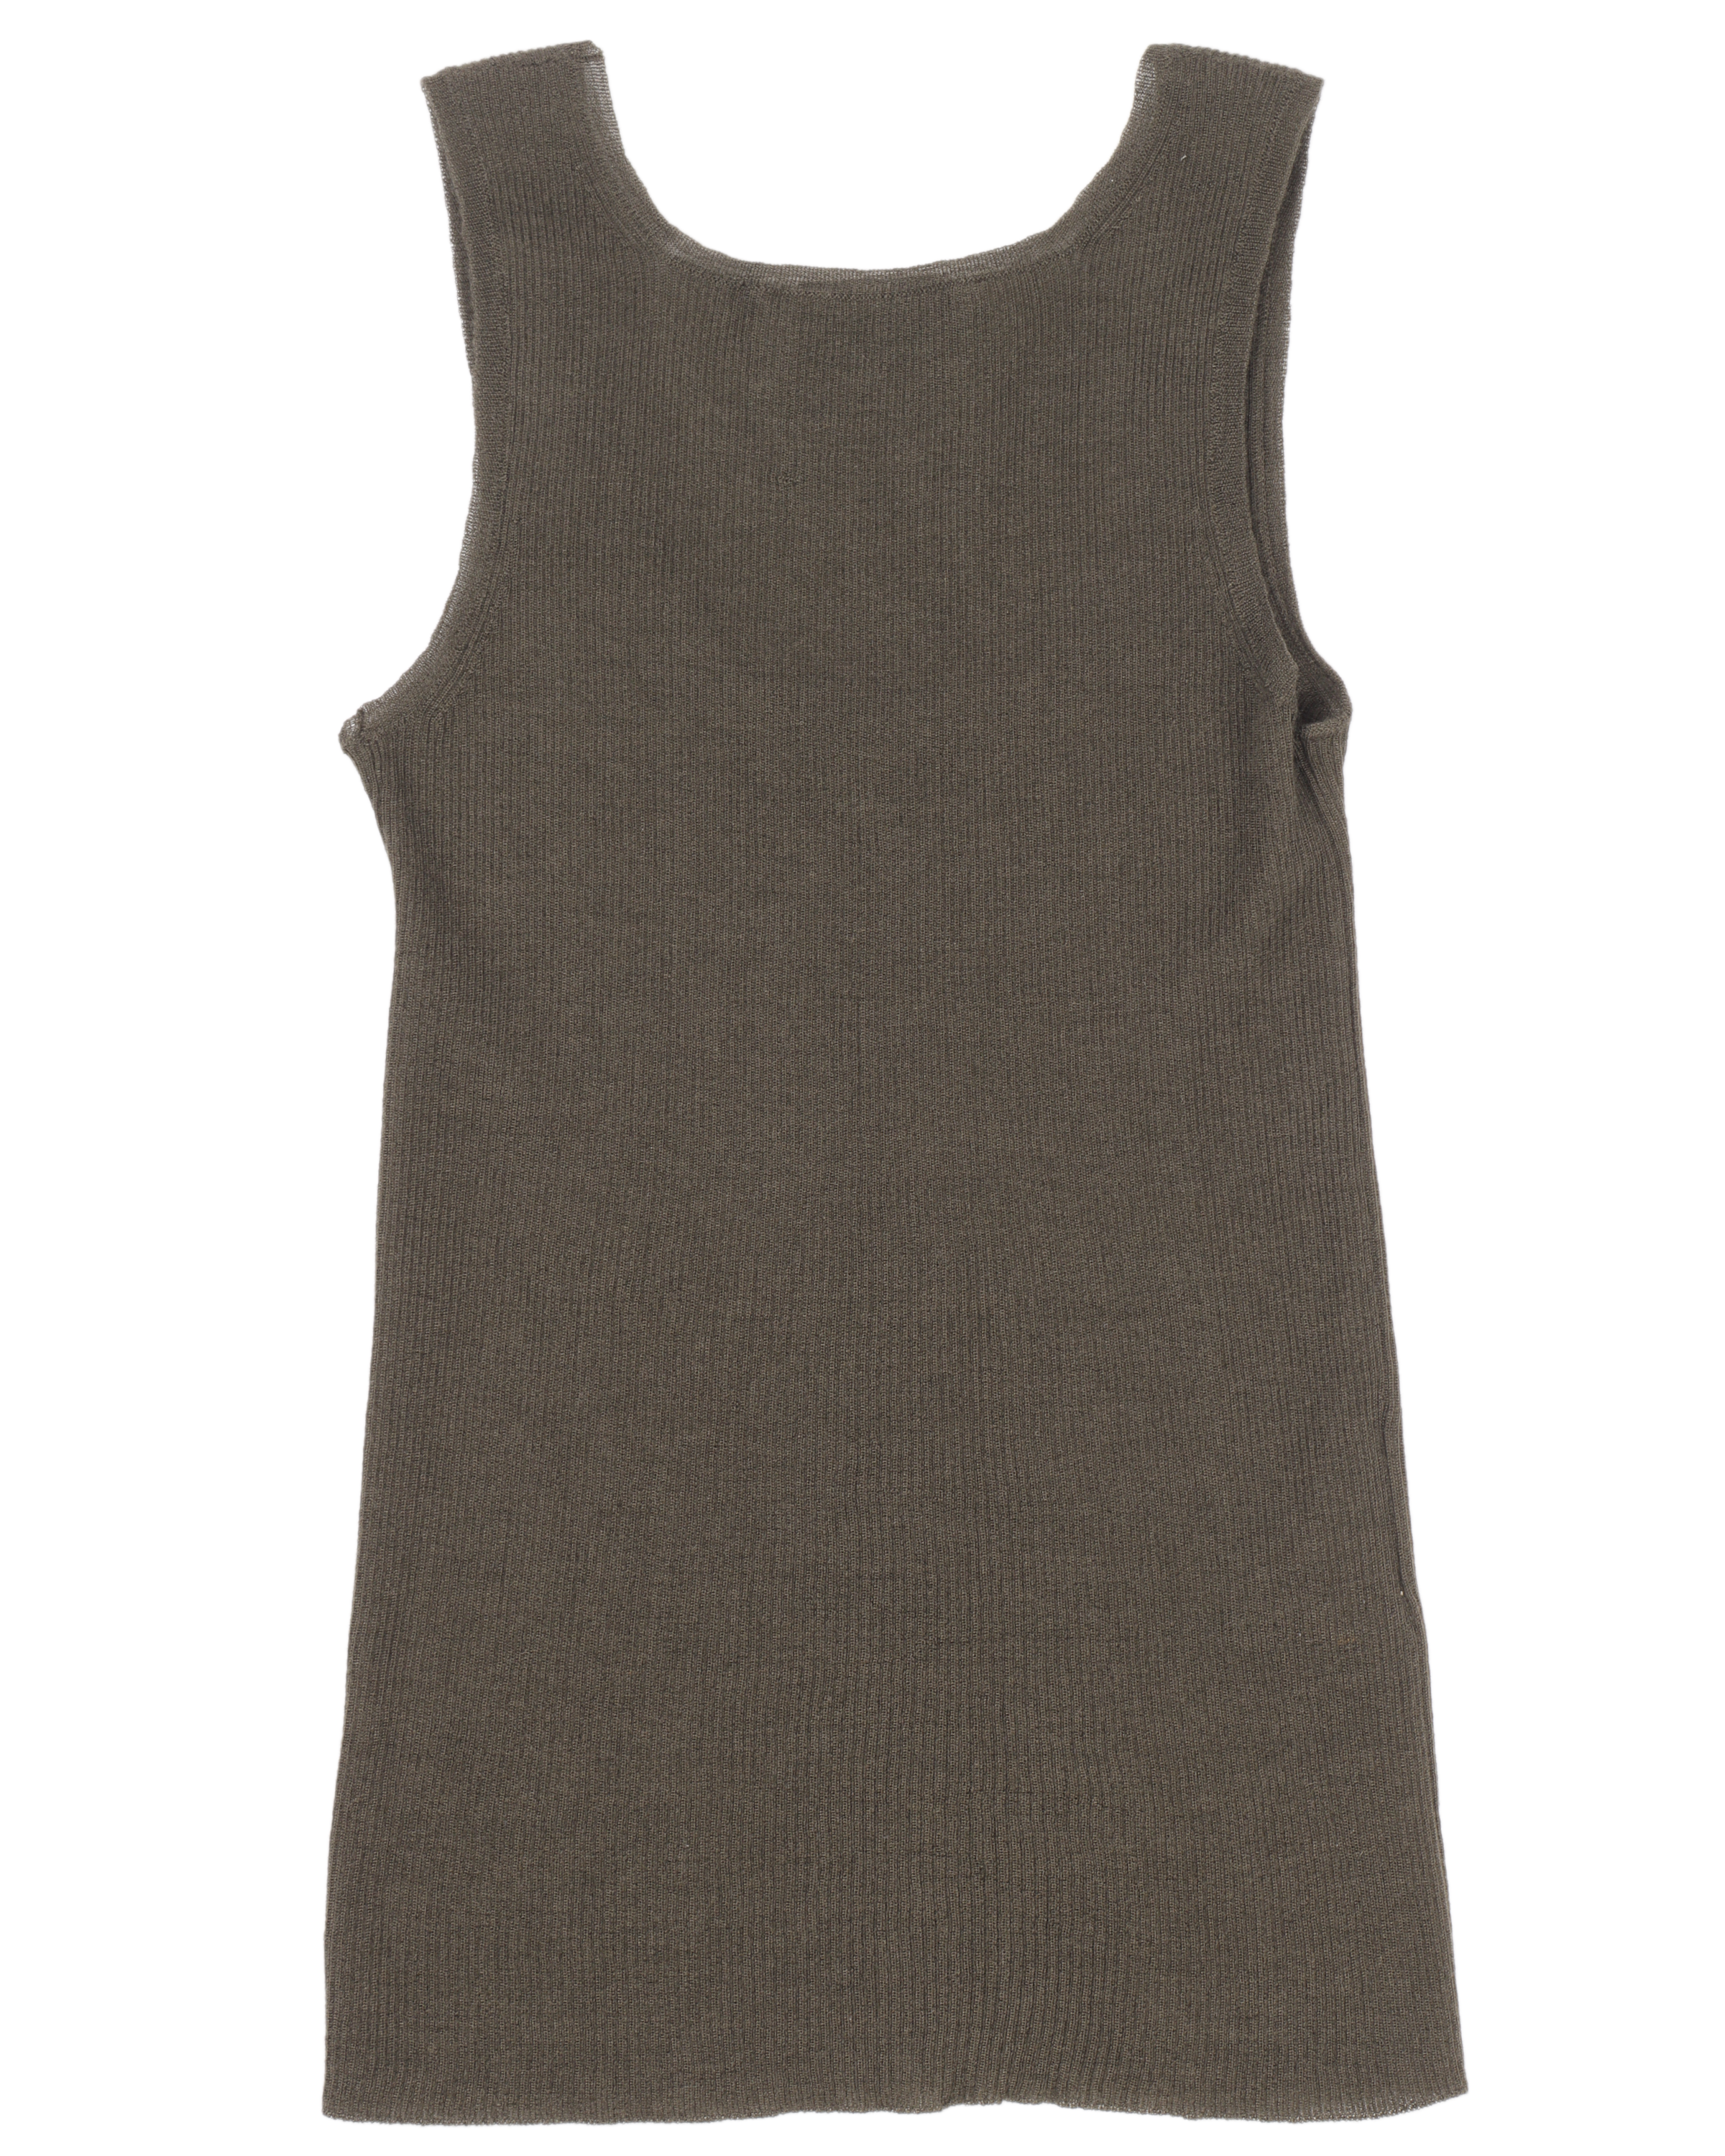 AW06 Olive Scoop Neck Tank Top